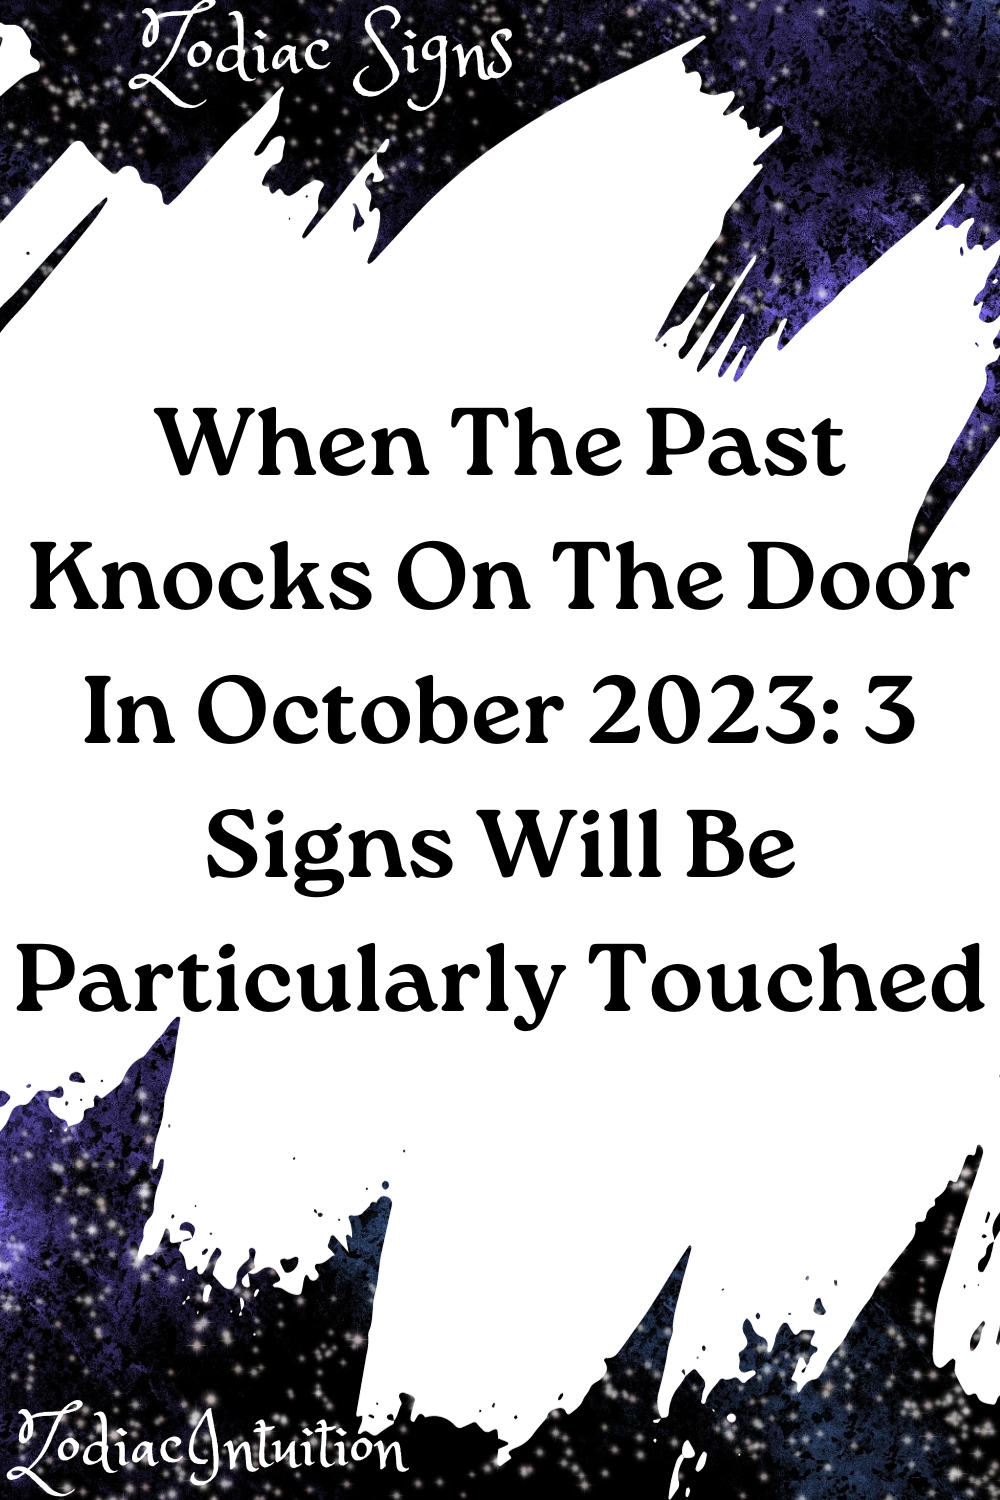 When The Past Knocks On The Door In October 2023: 3 Signs Will Be Particularly Touched